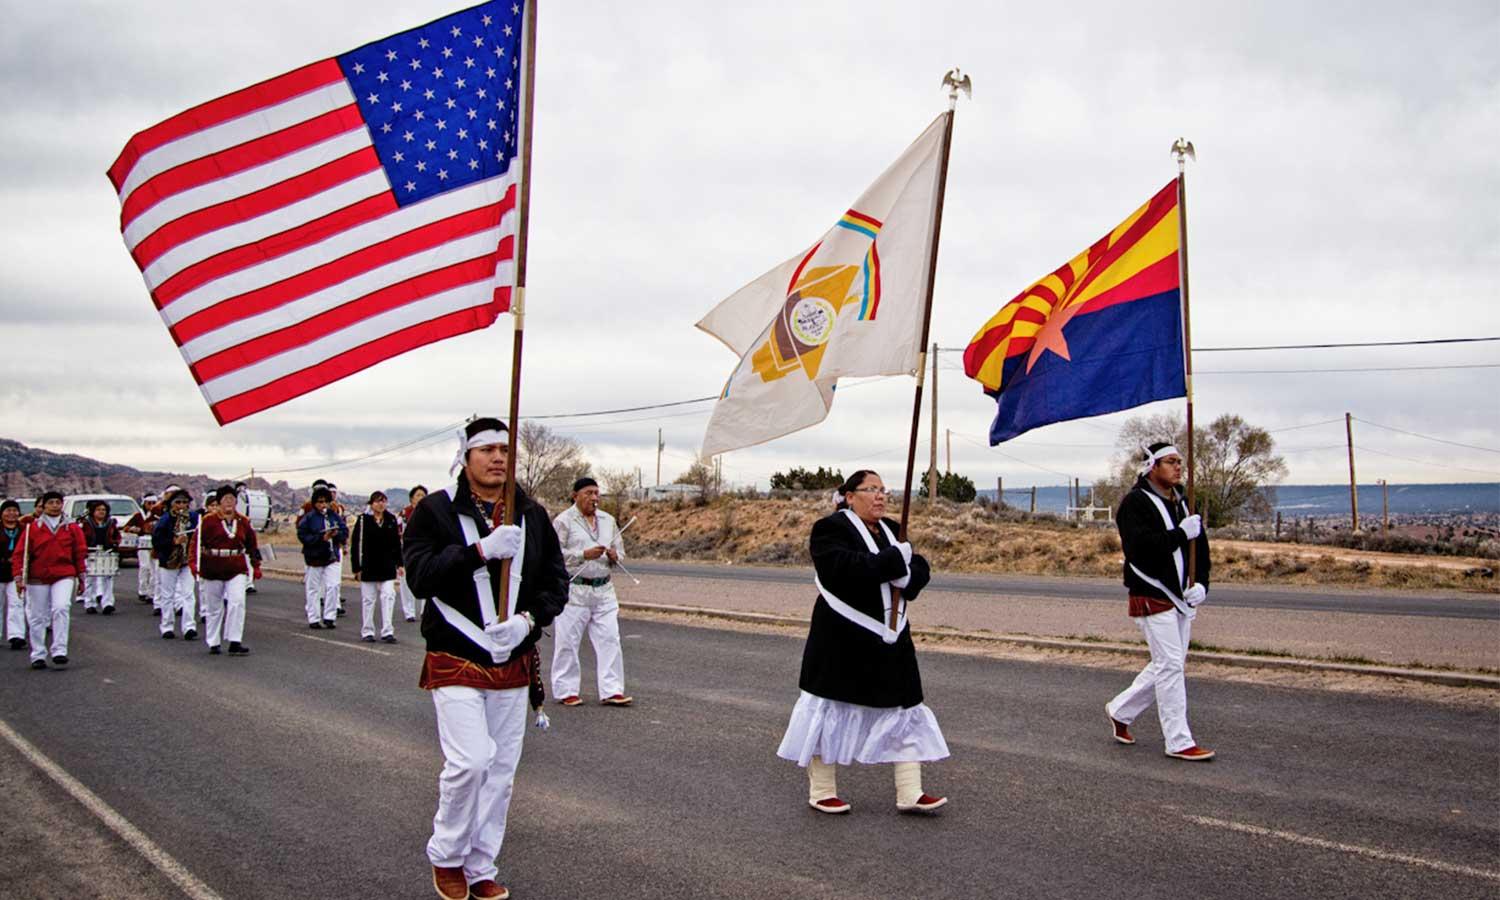 The Navajo Nation band march towards the Capital in Window Rock, AZ.